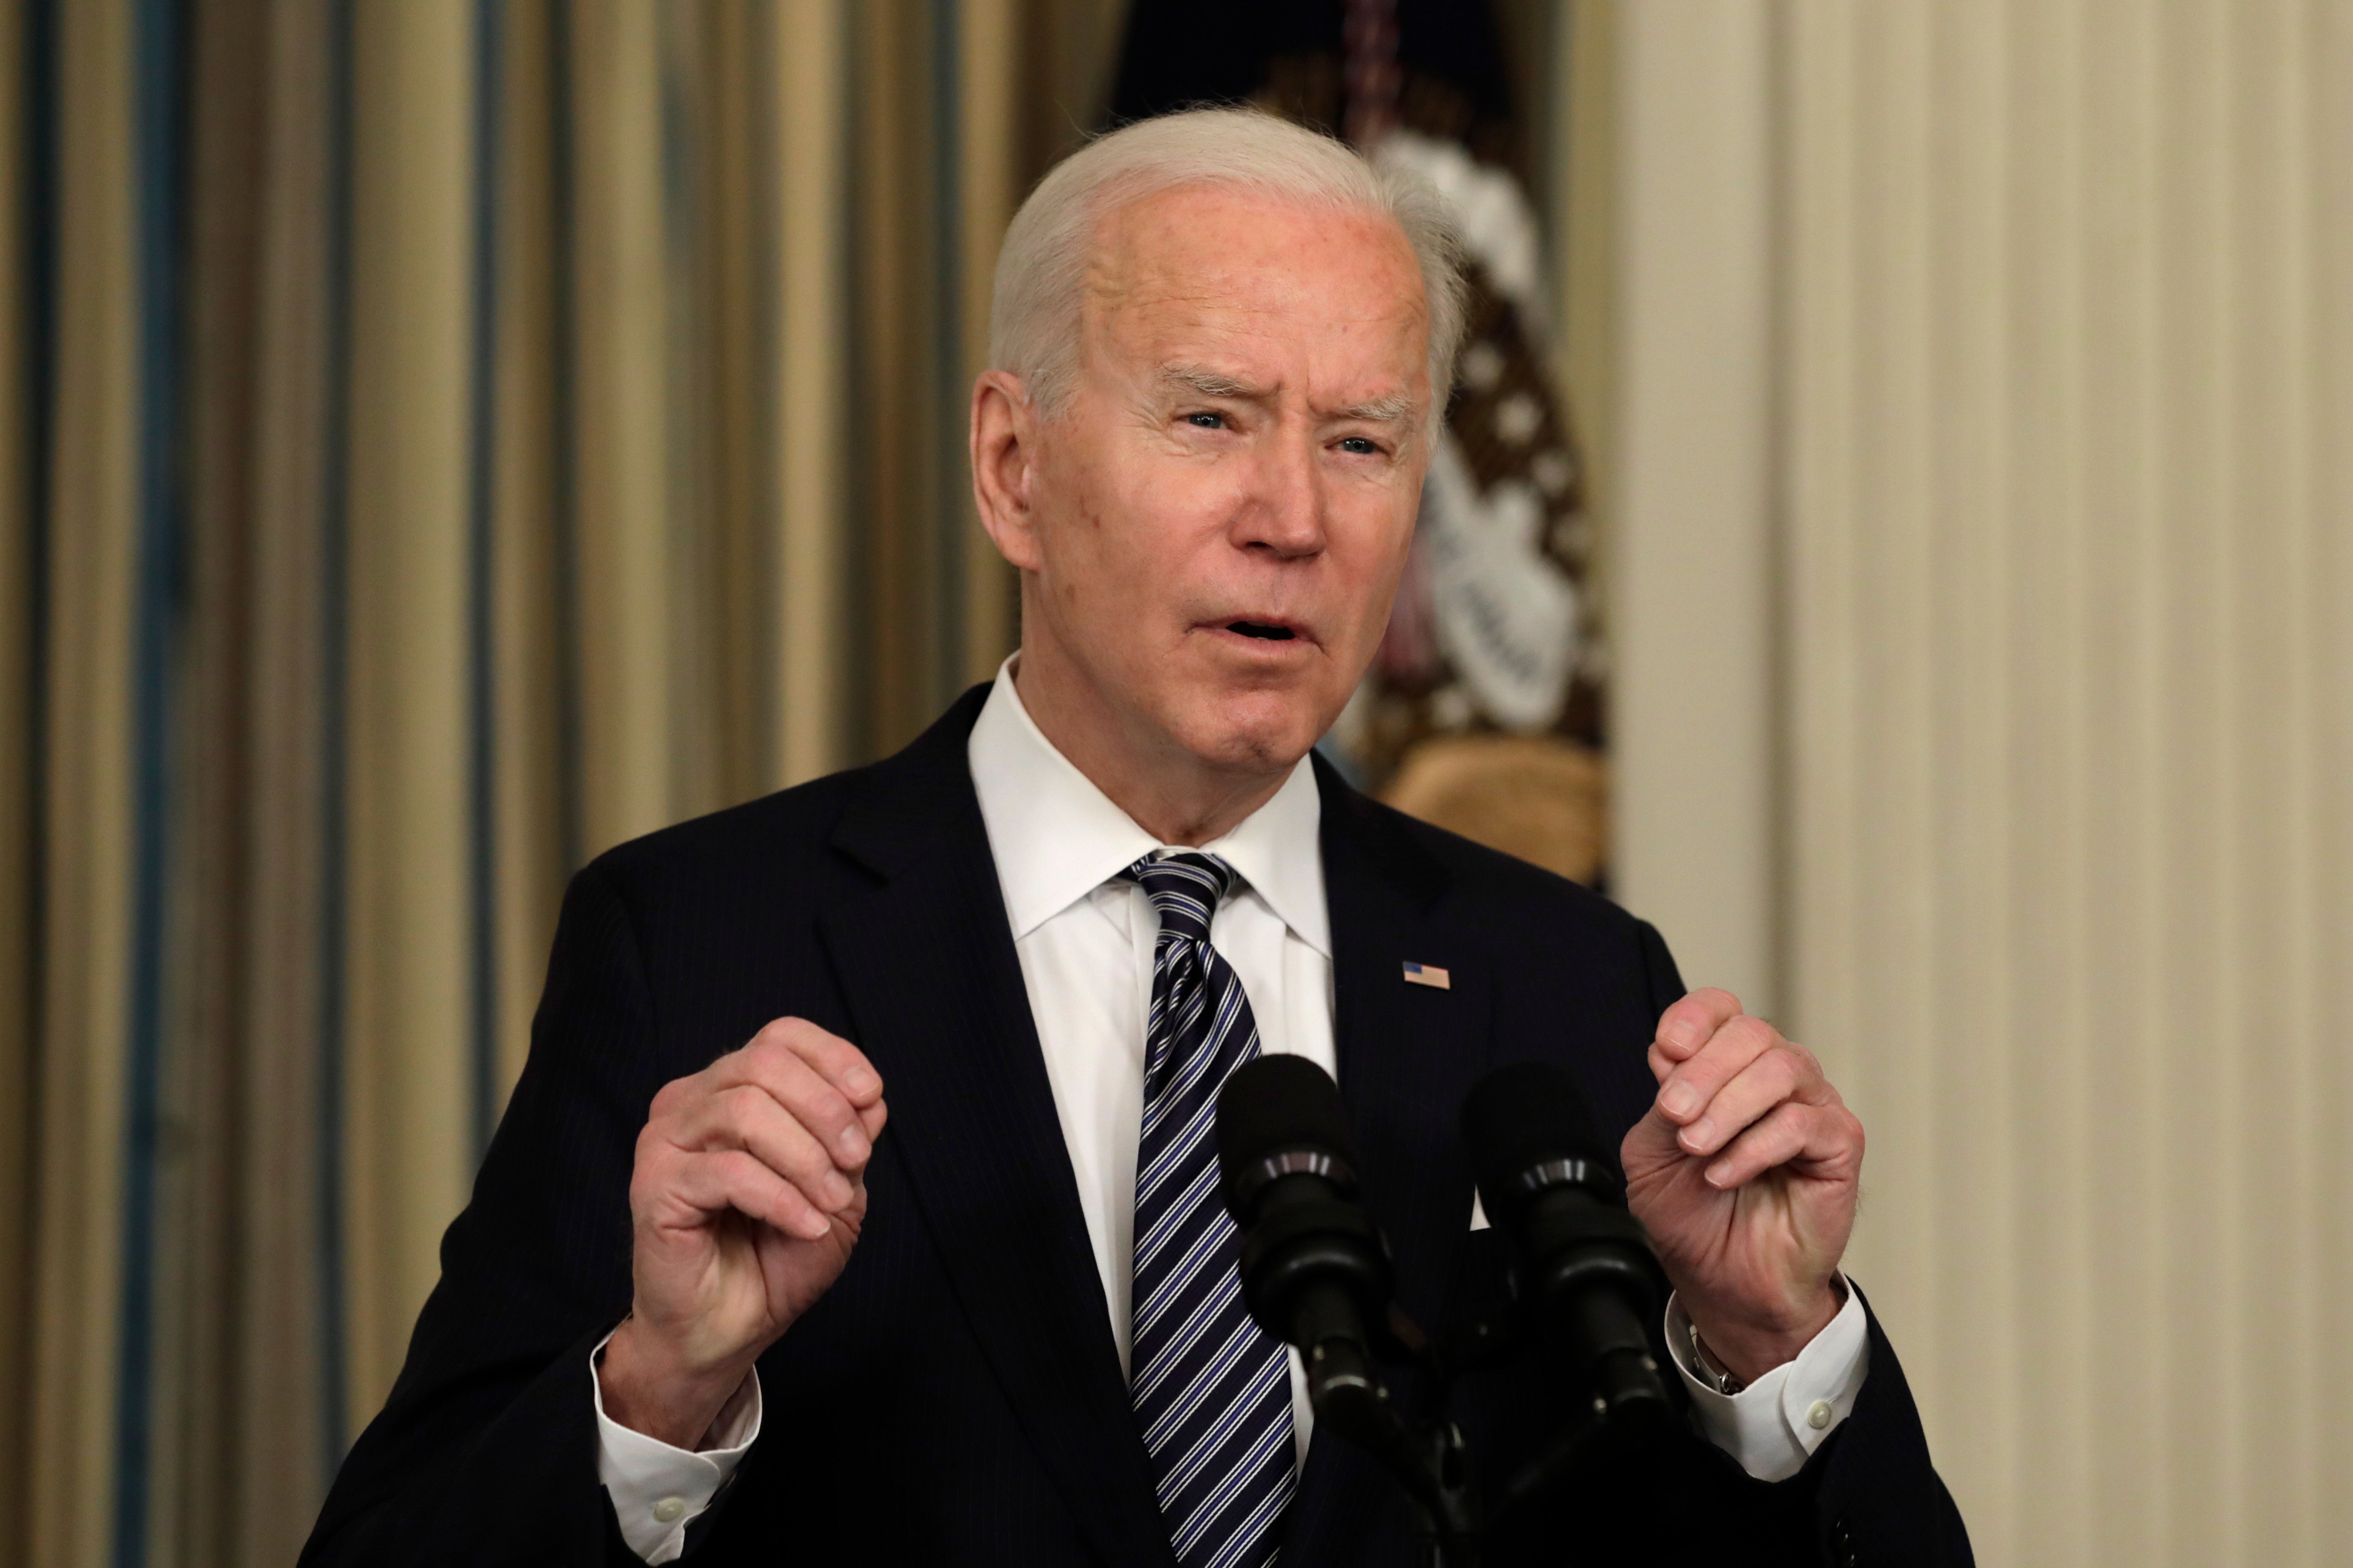 President Joe Biden delivers remarks on the implementation of the American Rescue Plan, at the White House in Washington